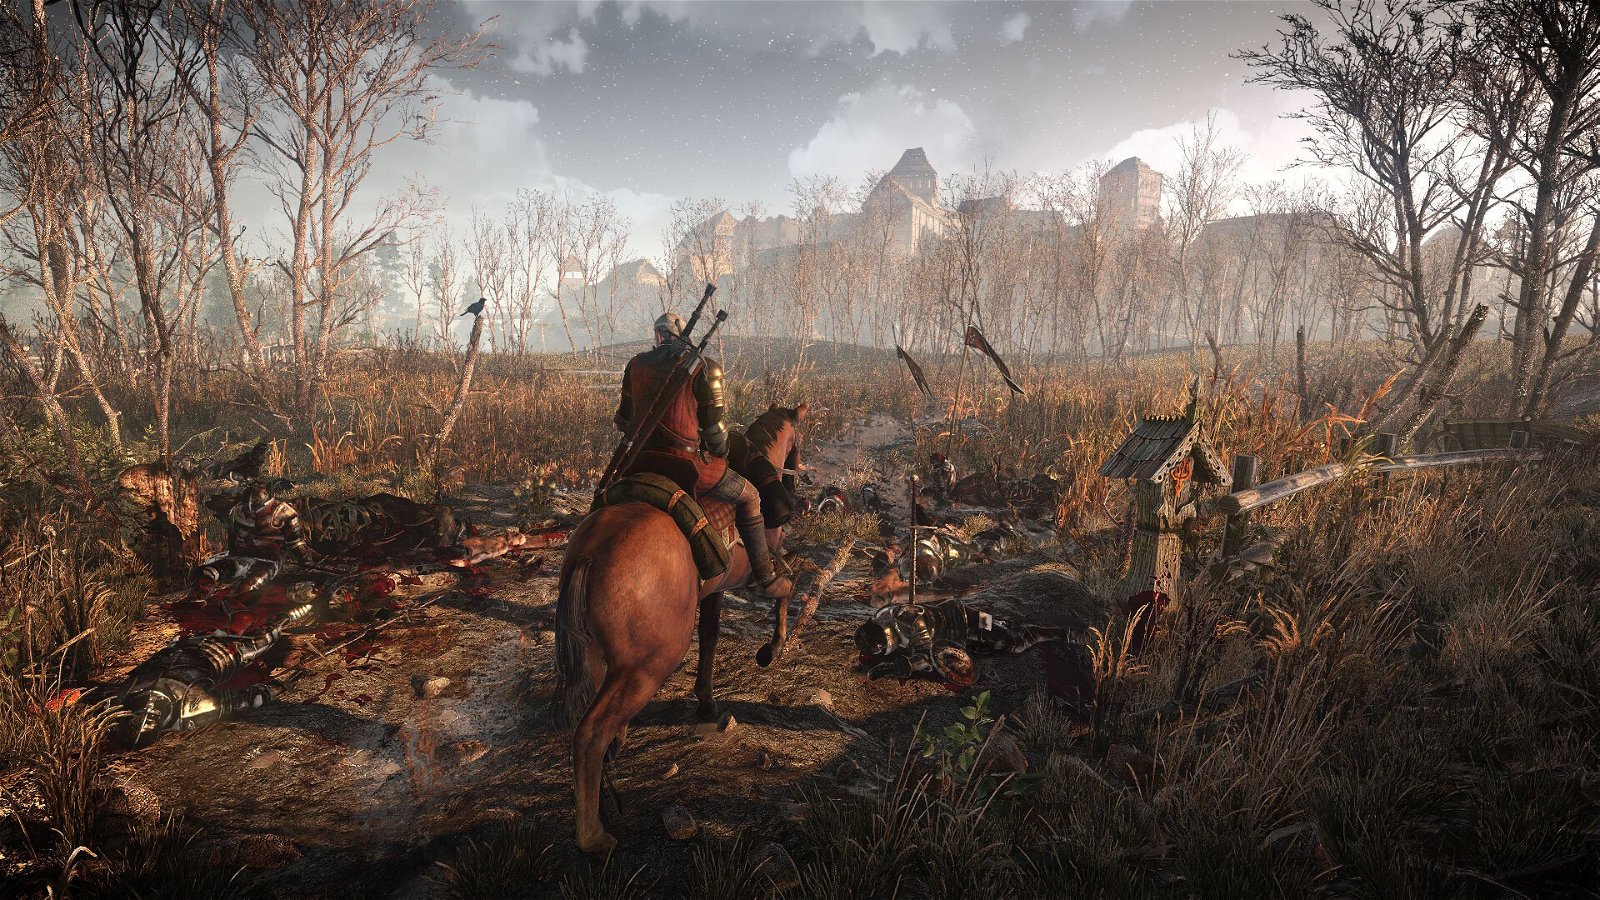 The Visuals Of The Witcher 3 Show The True Power On Consoles And The Pc